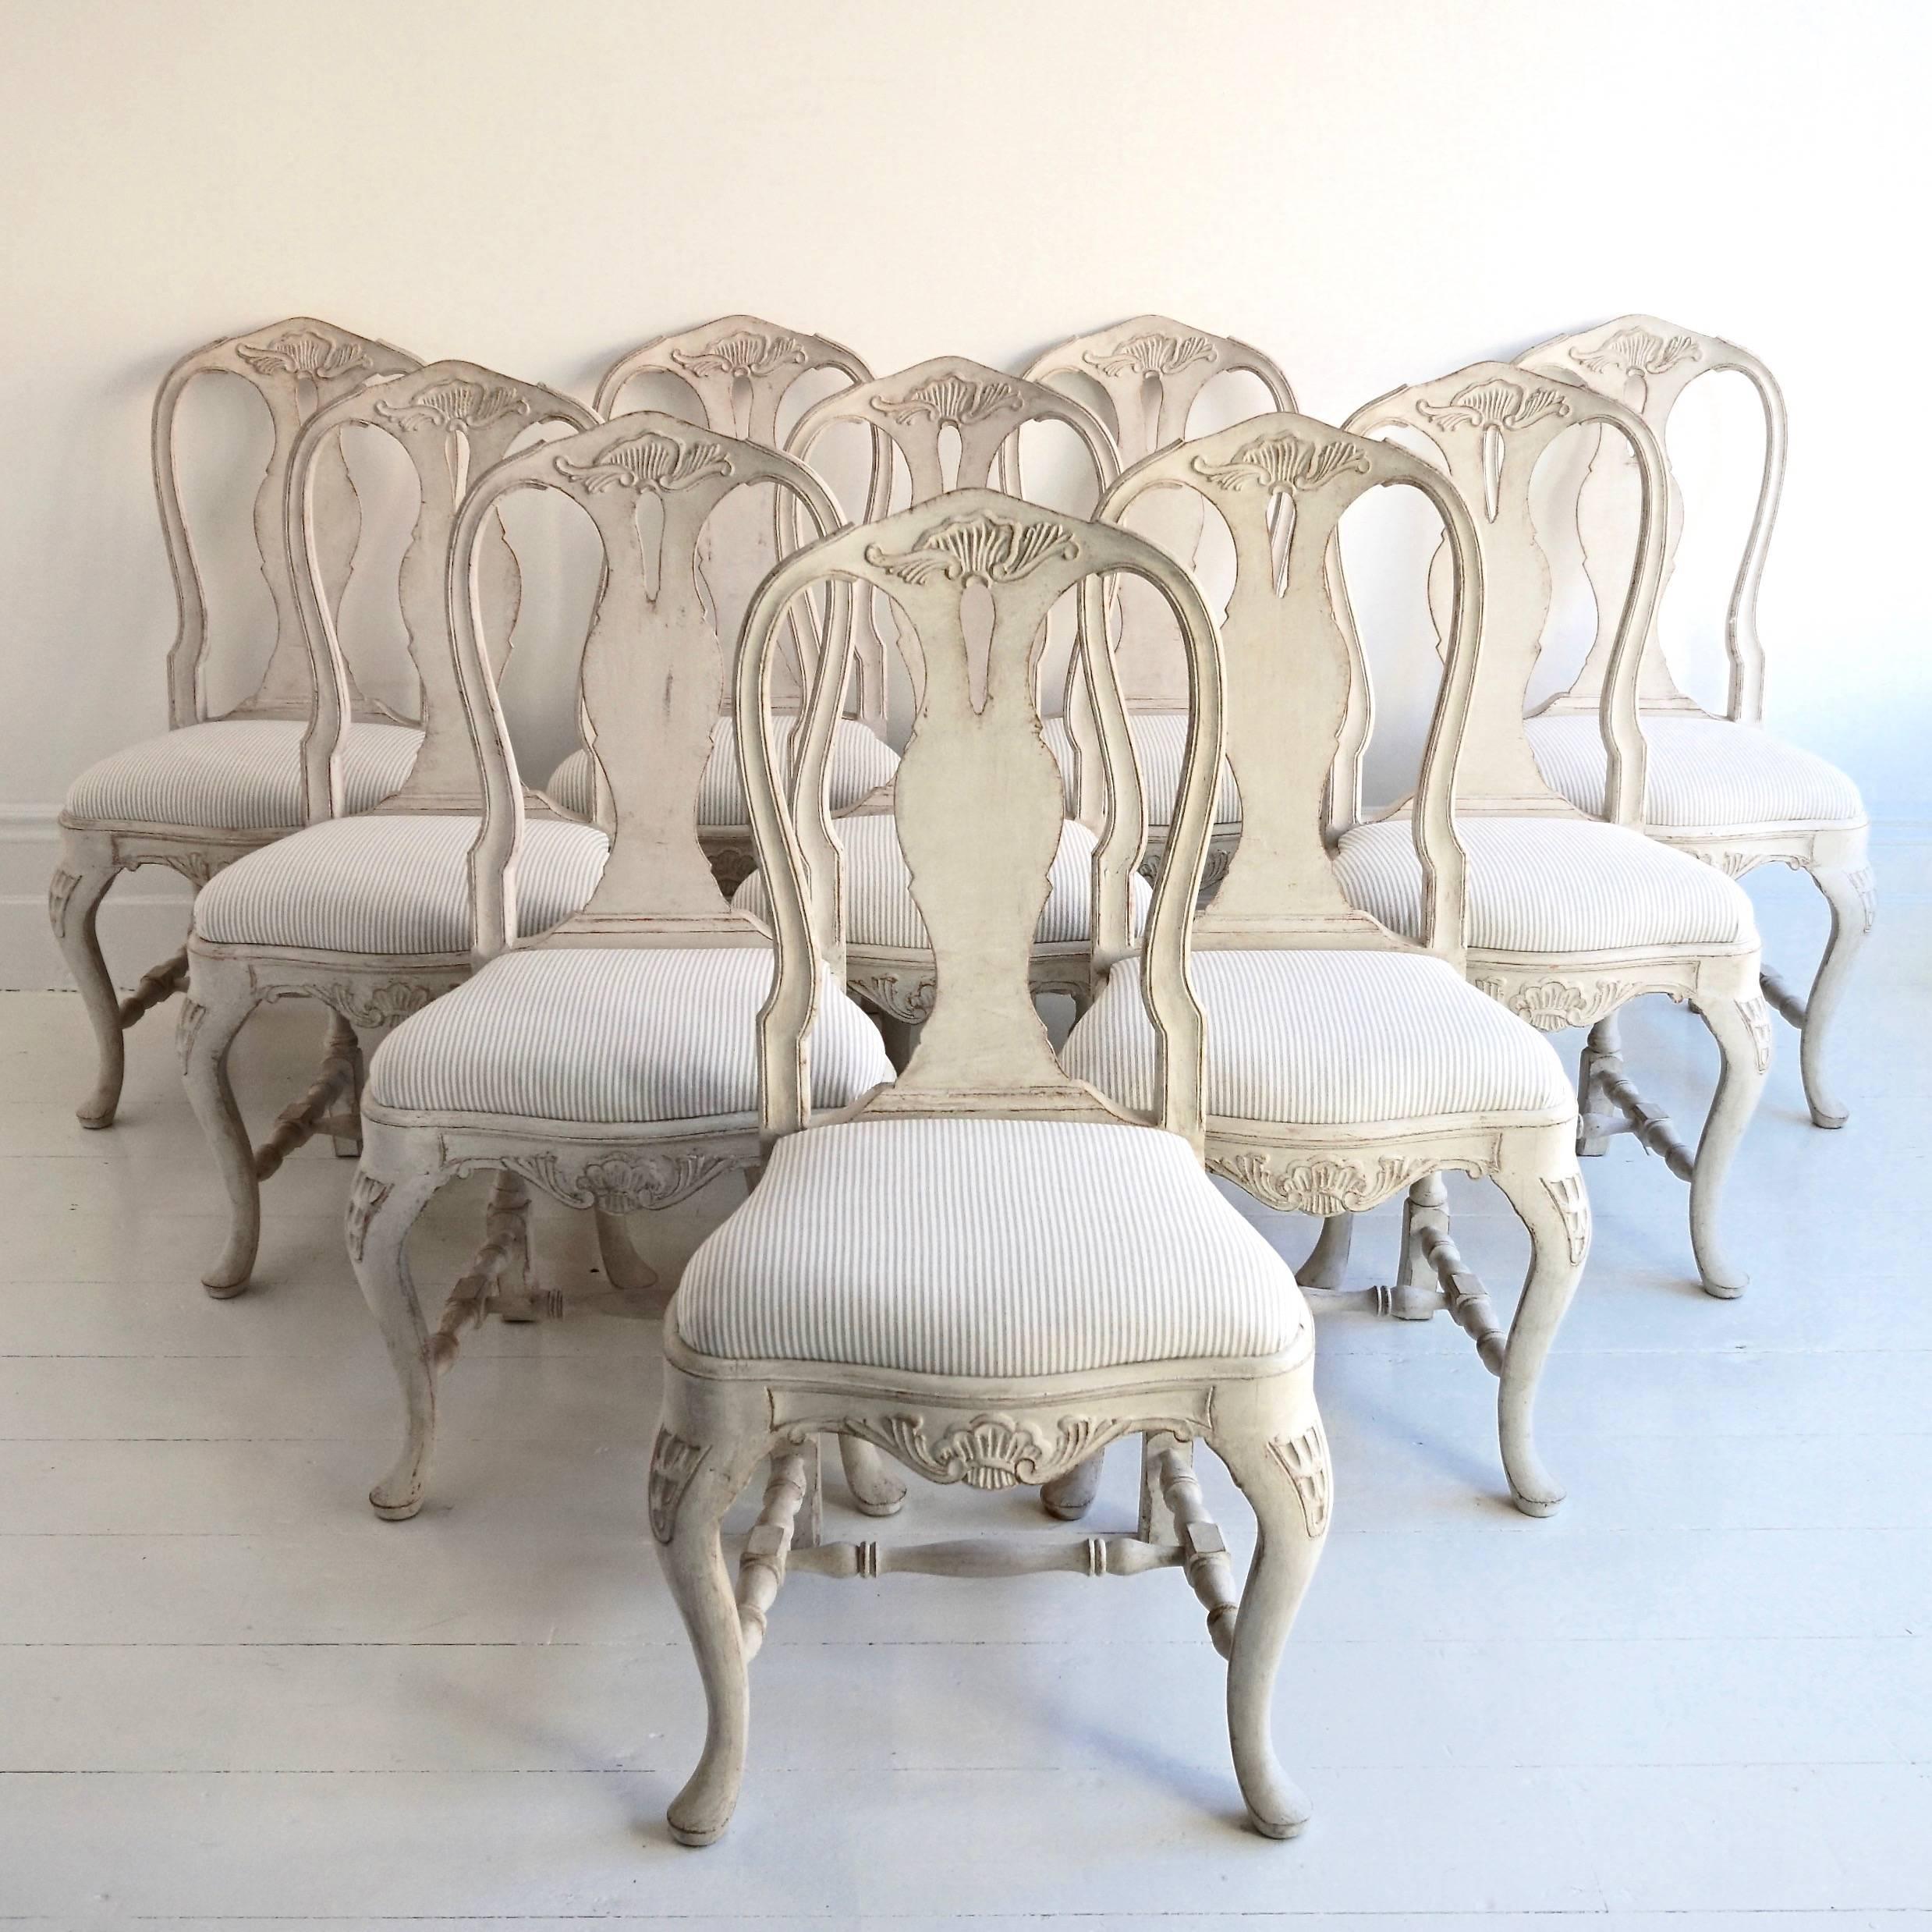 Hand-Carved Set of Ten Antique Swedish Rococo Style Dining Chairs